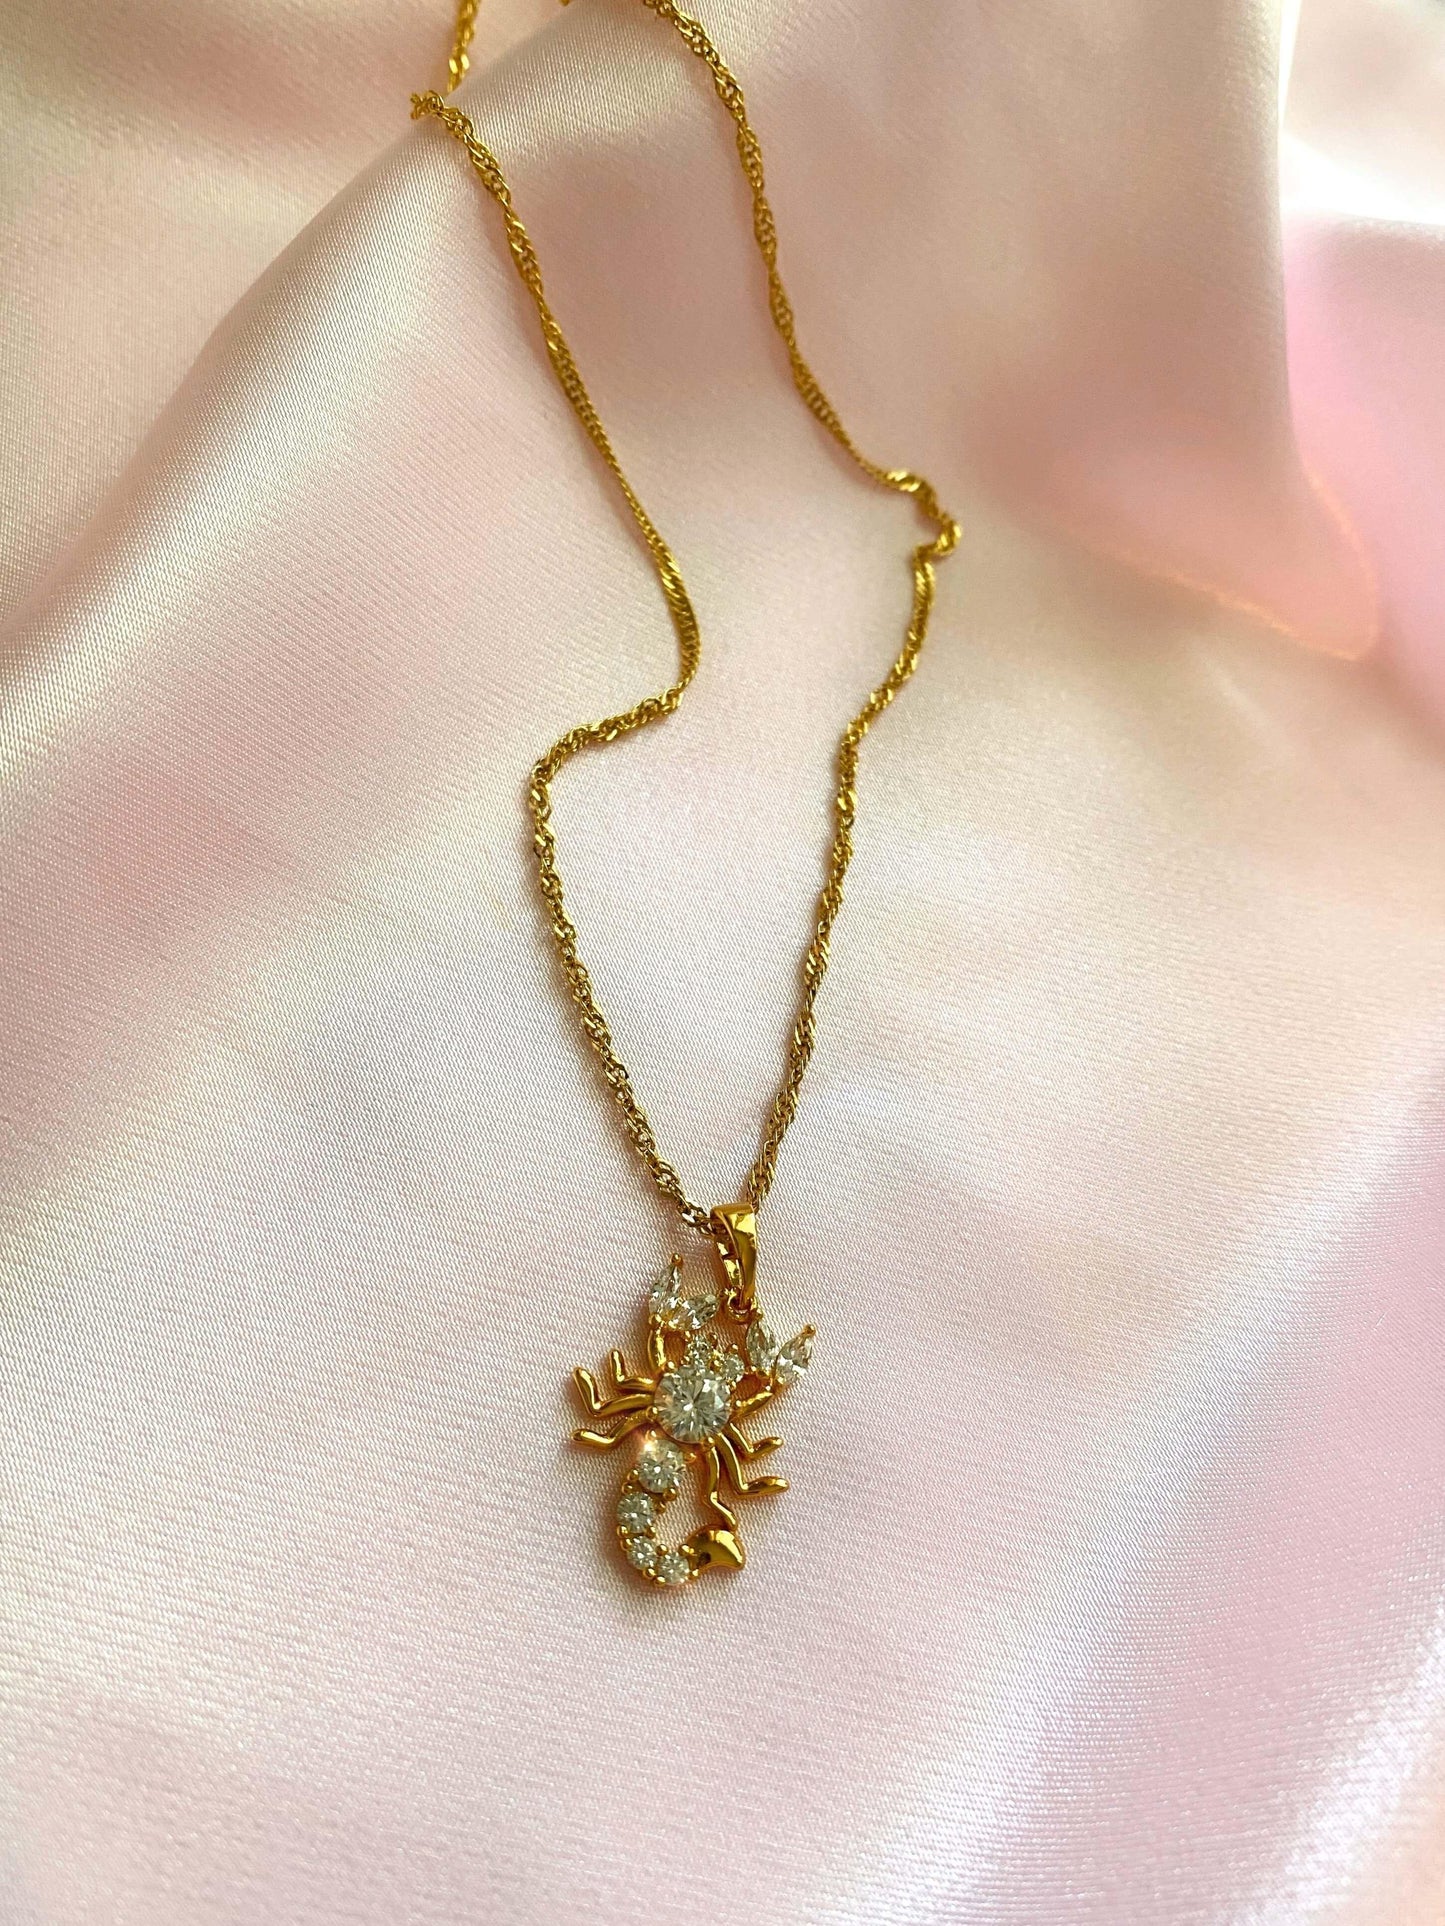 scorpion necklace cubic zirconia crystal necklace 18k gold 